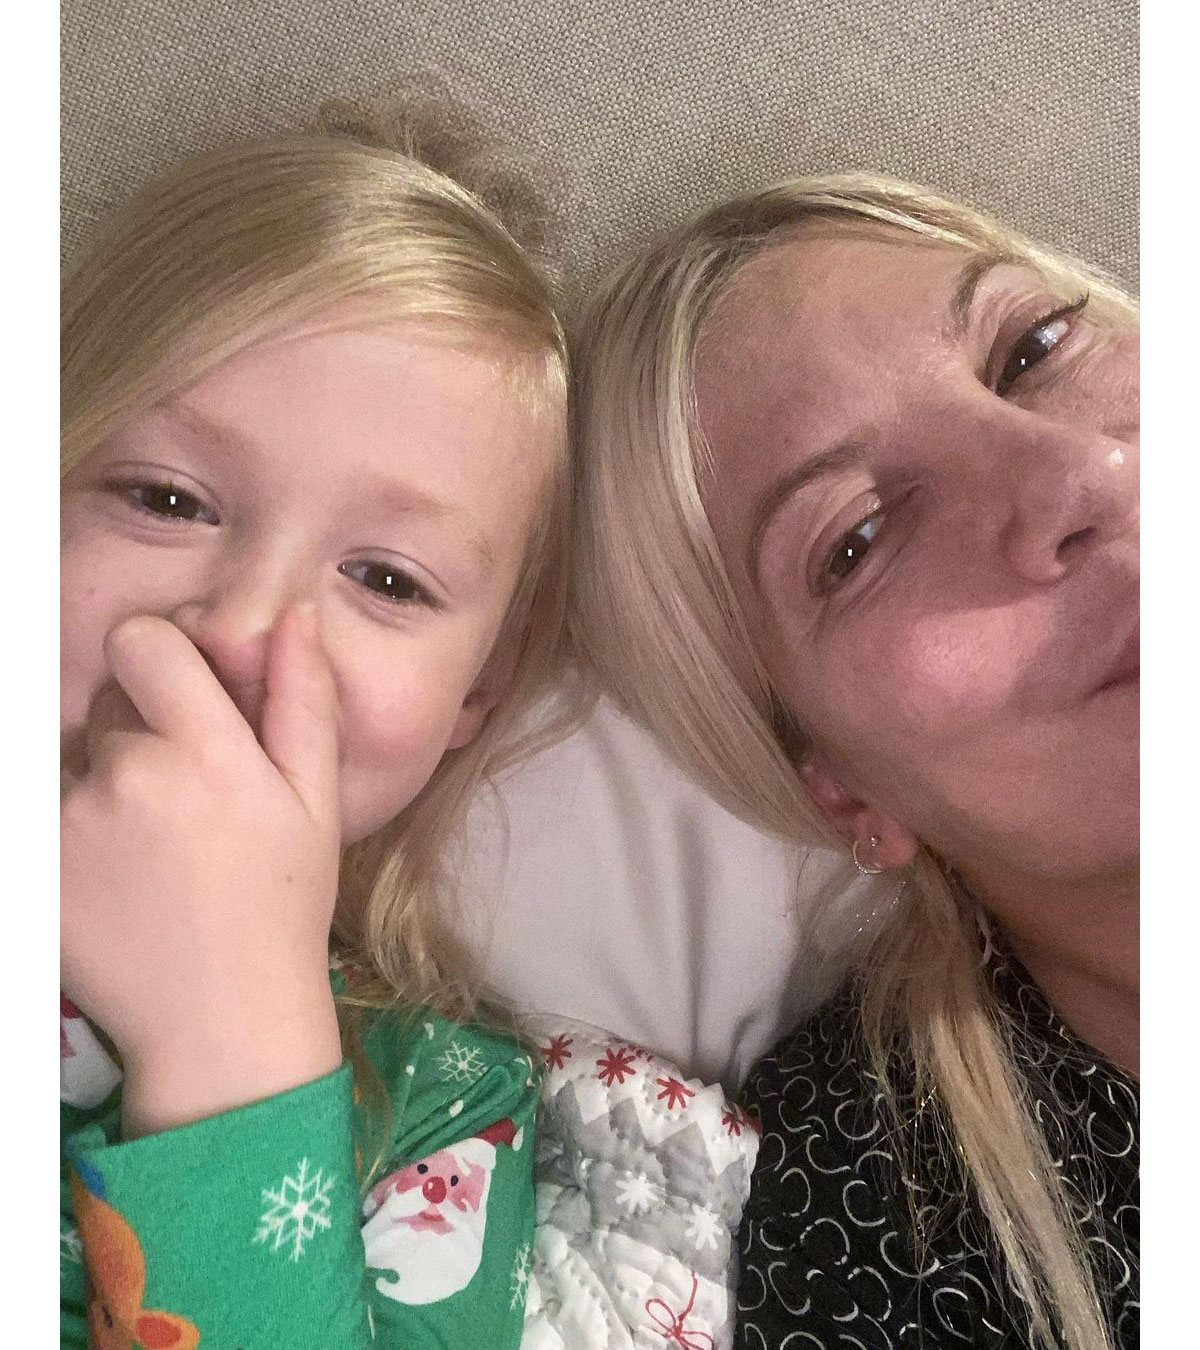 Tori Spelling Entire Family Tests Positive for COVID-19